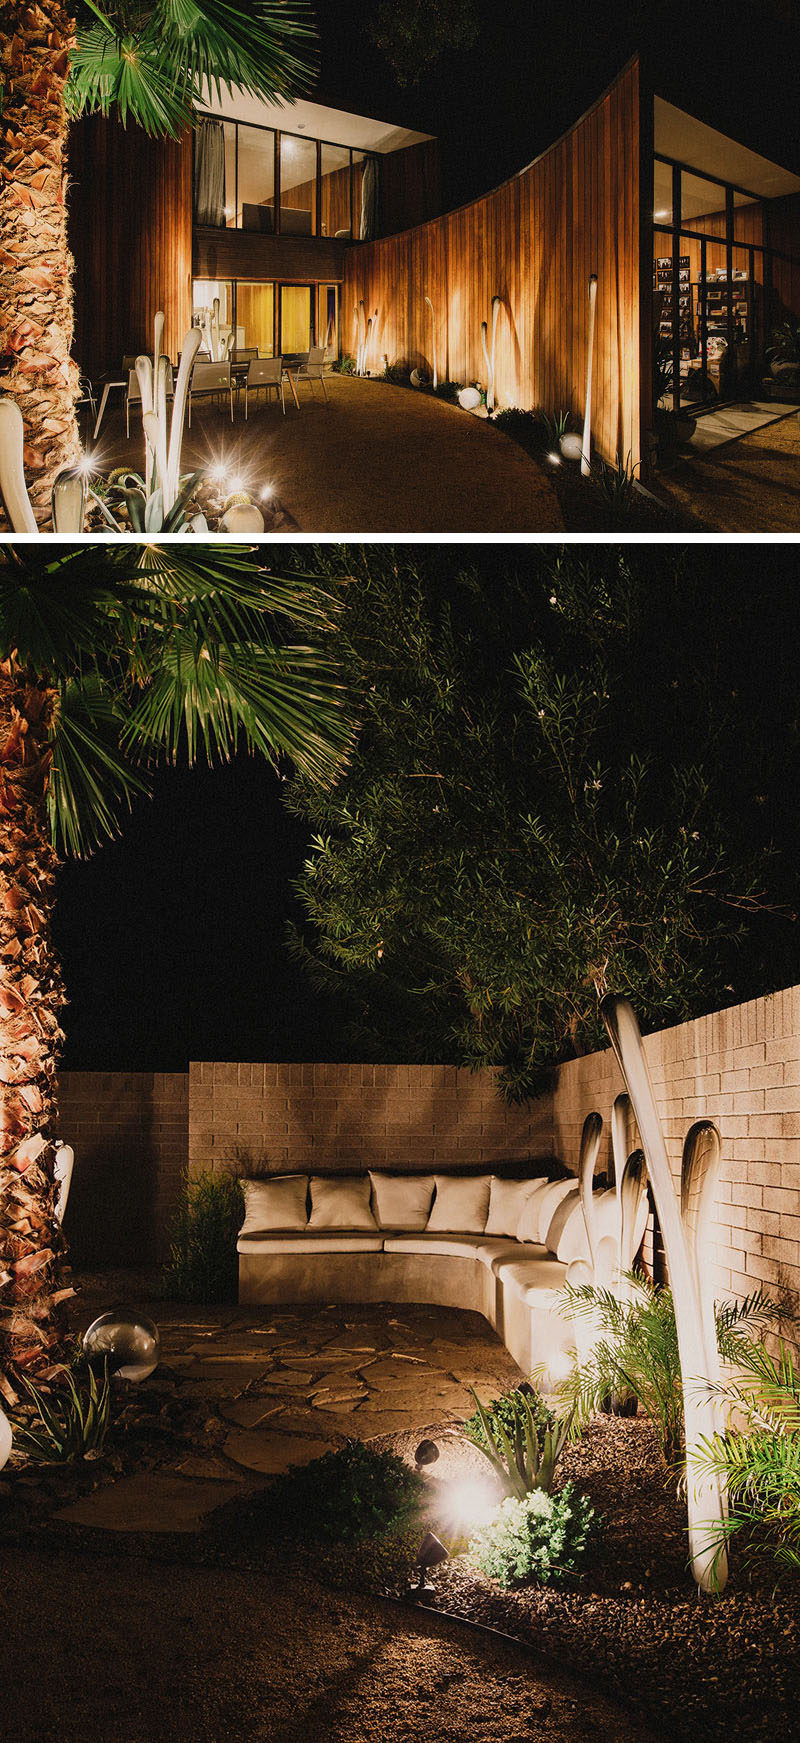 8 Outdoor Lighting Ideas To Inspire Your Spring Backyard ...